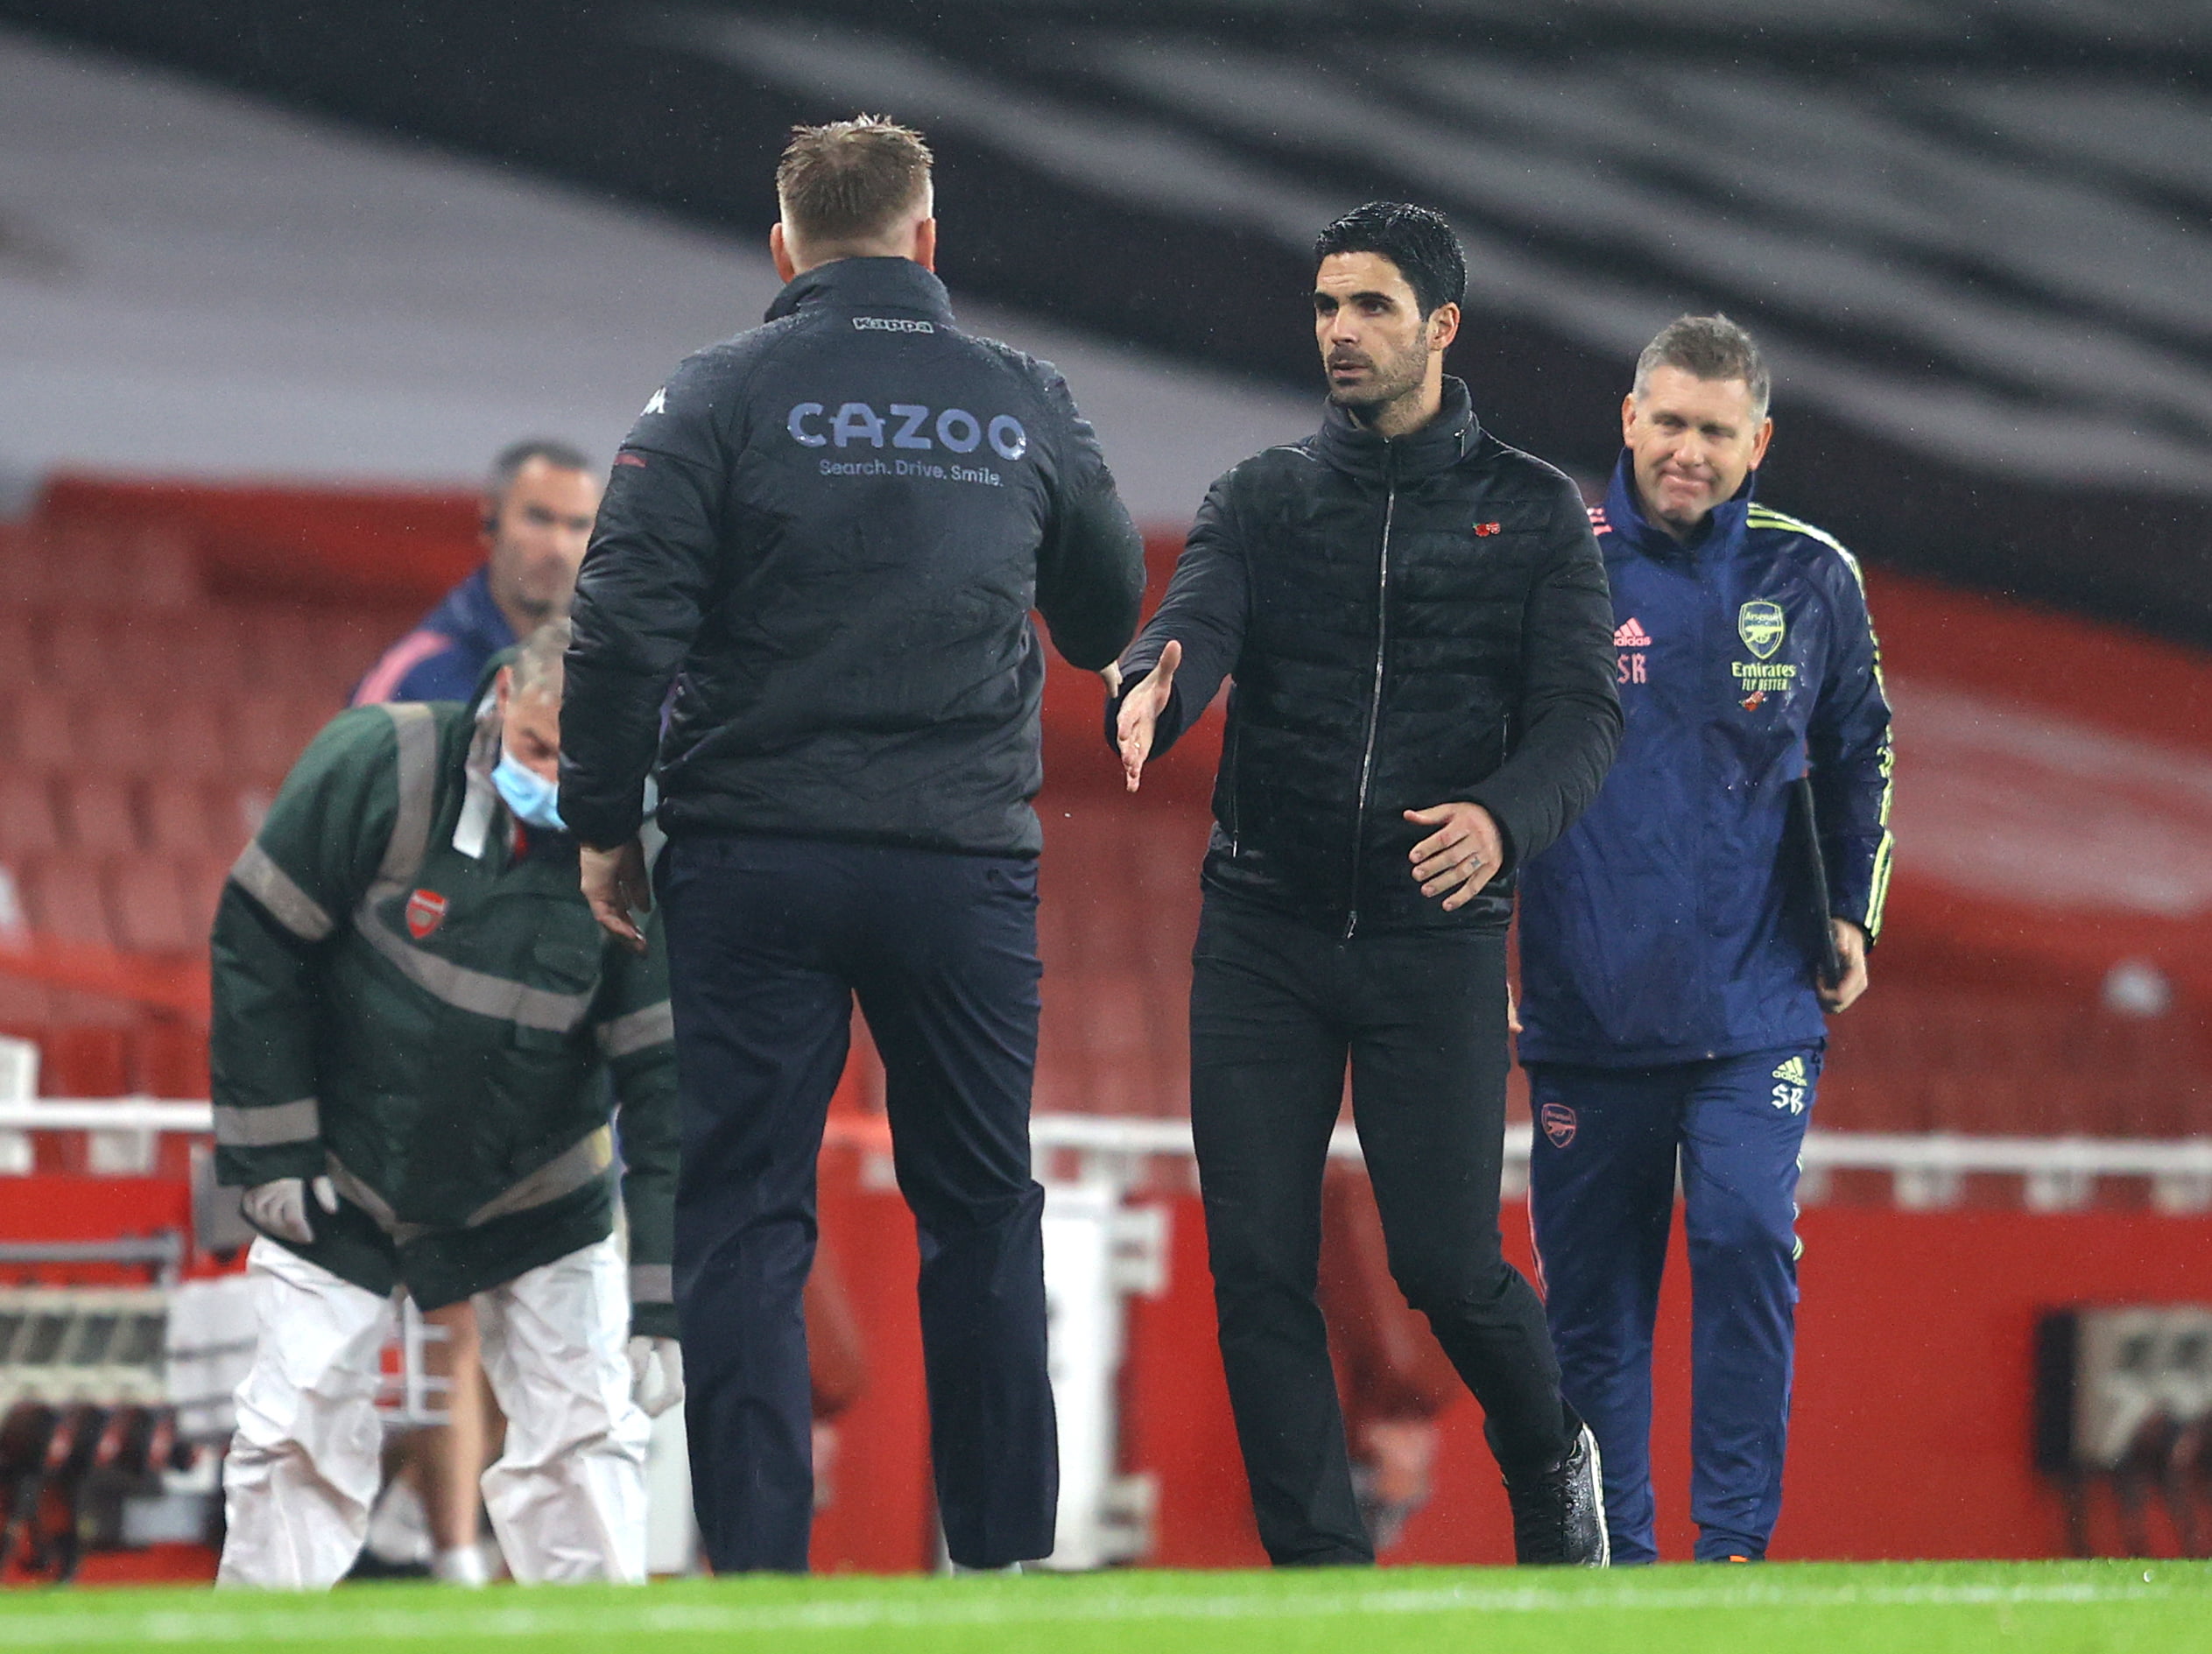 LONDON, ENGLAND - NOVEMBER 08: Dean Smith, Manager of Aston Villa shakes hands with Mikel Arteta, Manager of Arsenal during the Premier League match between Arsenal and Aston Villa at Emirates Stadium on November 08, 2020 in London, England. Sporting stadiums around the UK remain under strict restrictions due to the Coronavirus Pandemic as Government social distancing laws prohibit fans inside venues resulting in games being played behind closed doors. (Photo by Richard Heathcote/Getty Images)